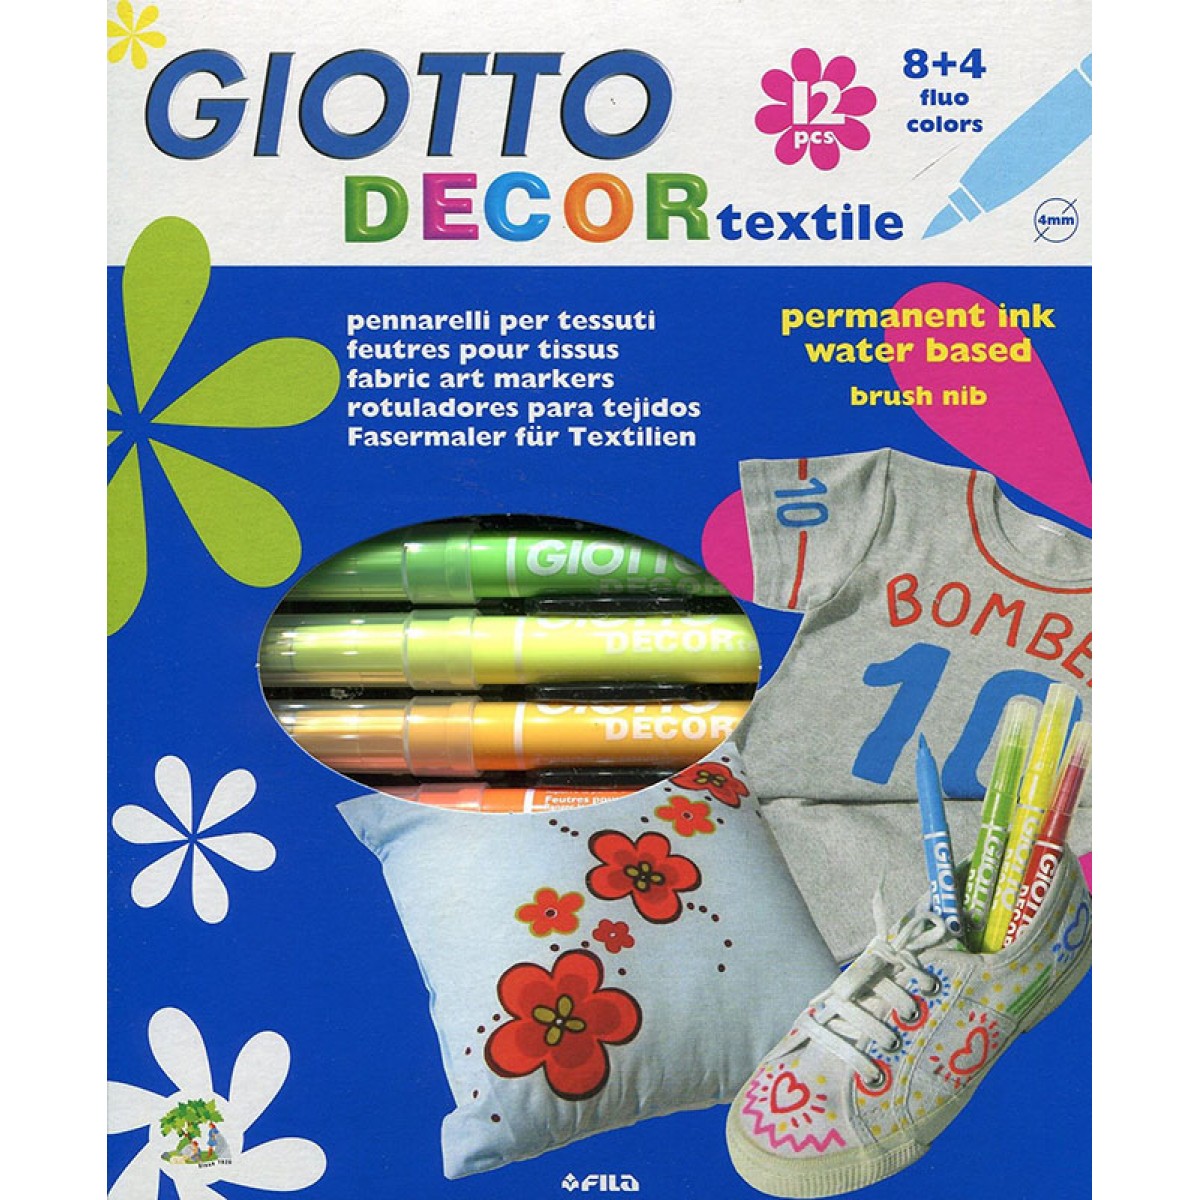 Giotto Μαρκαδόροι Textile (12 Τεμ.) Μαρκαδόροι